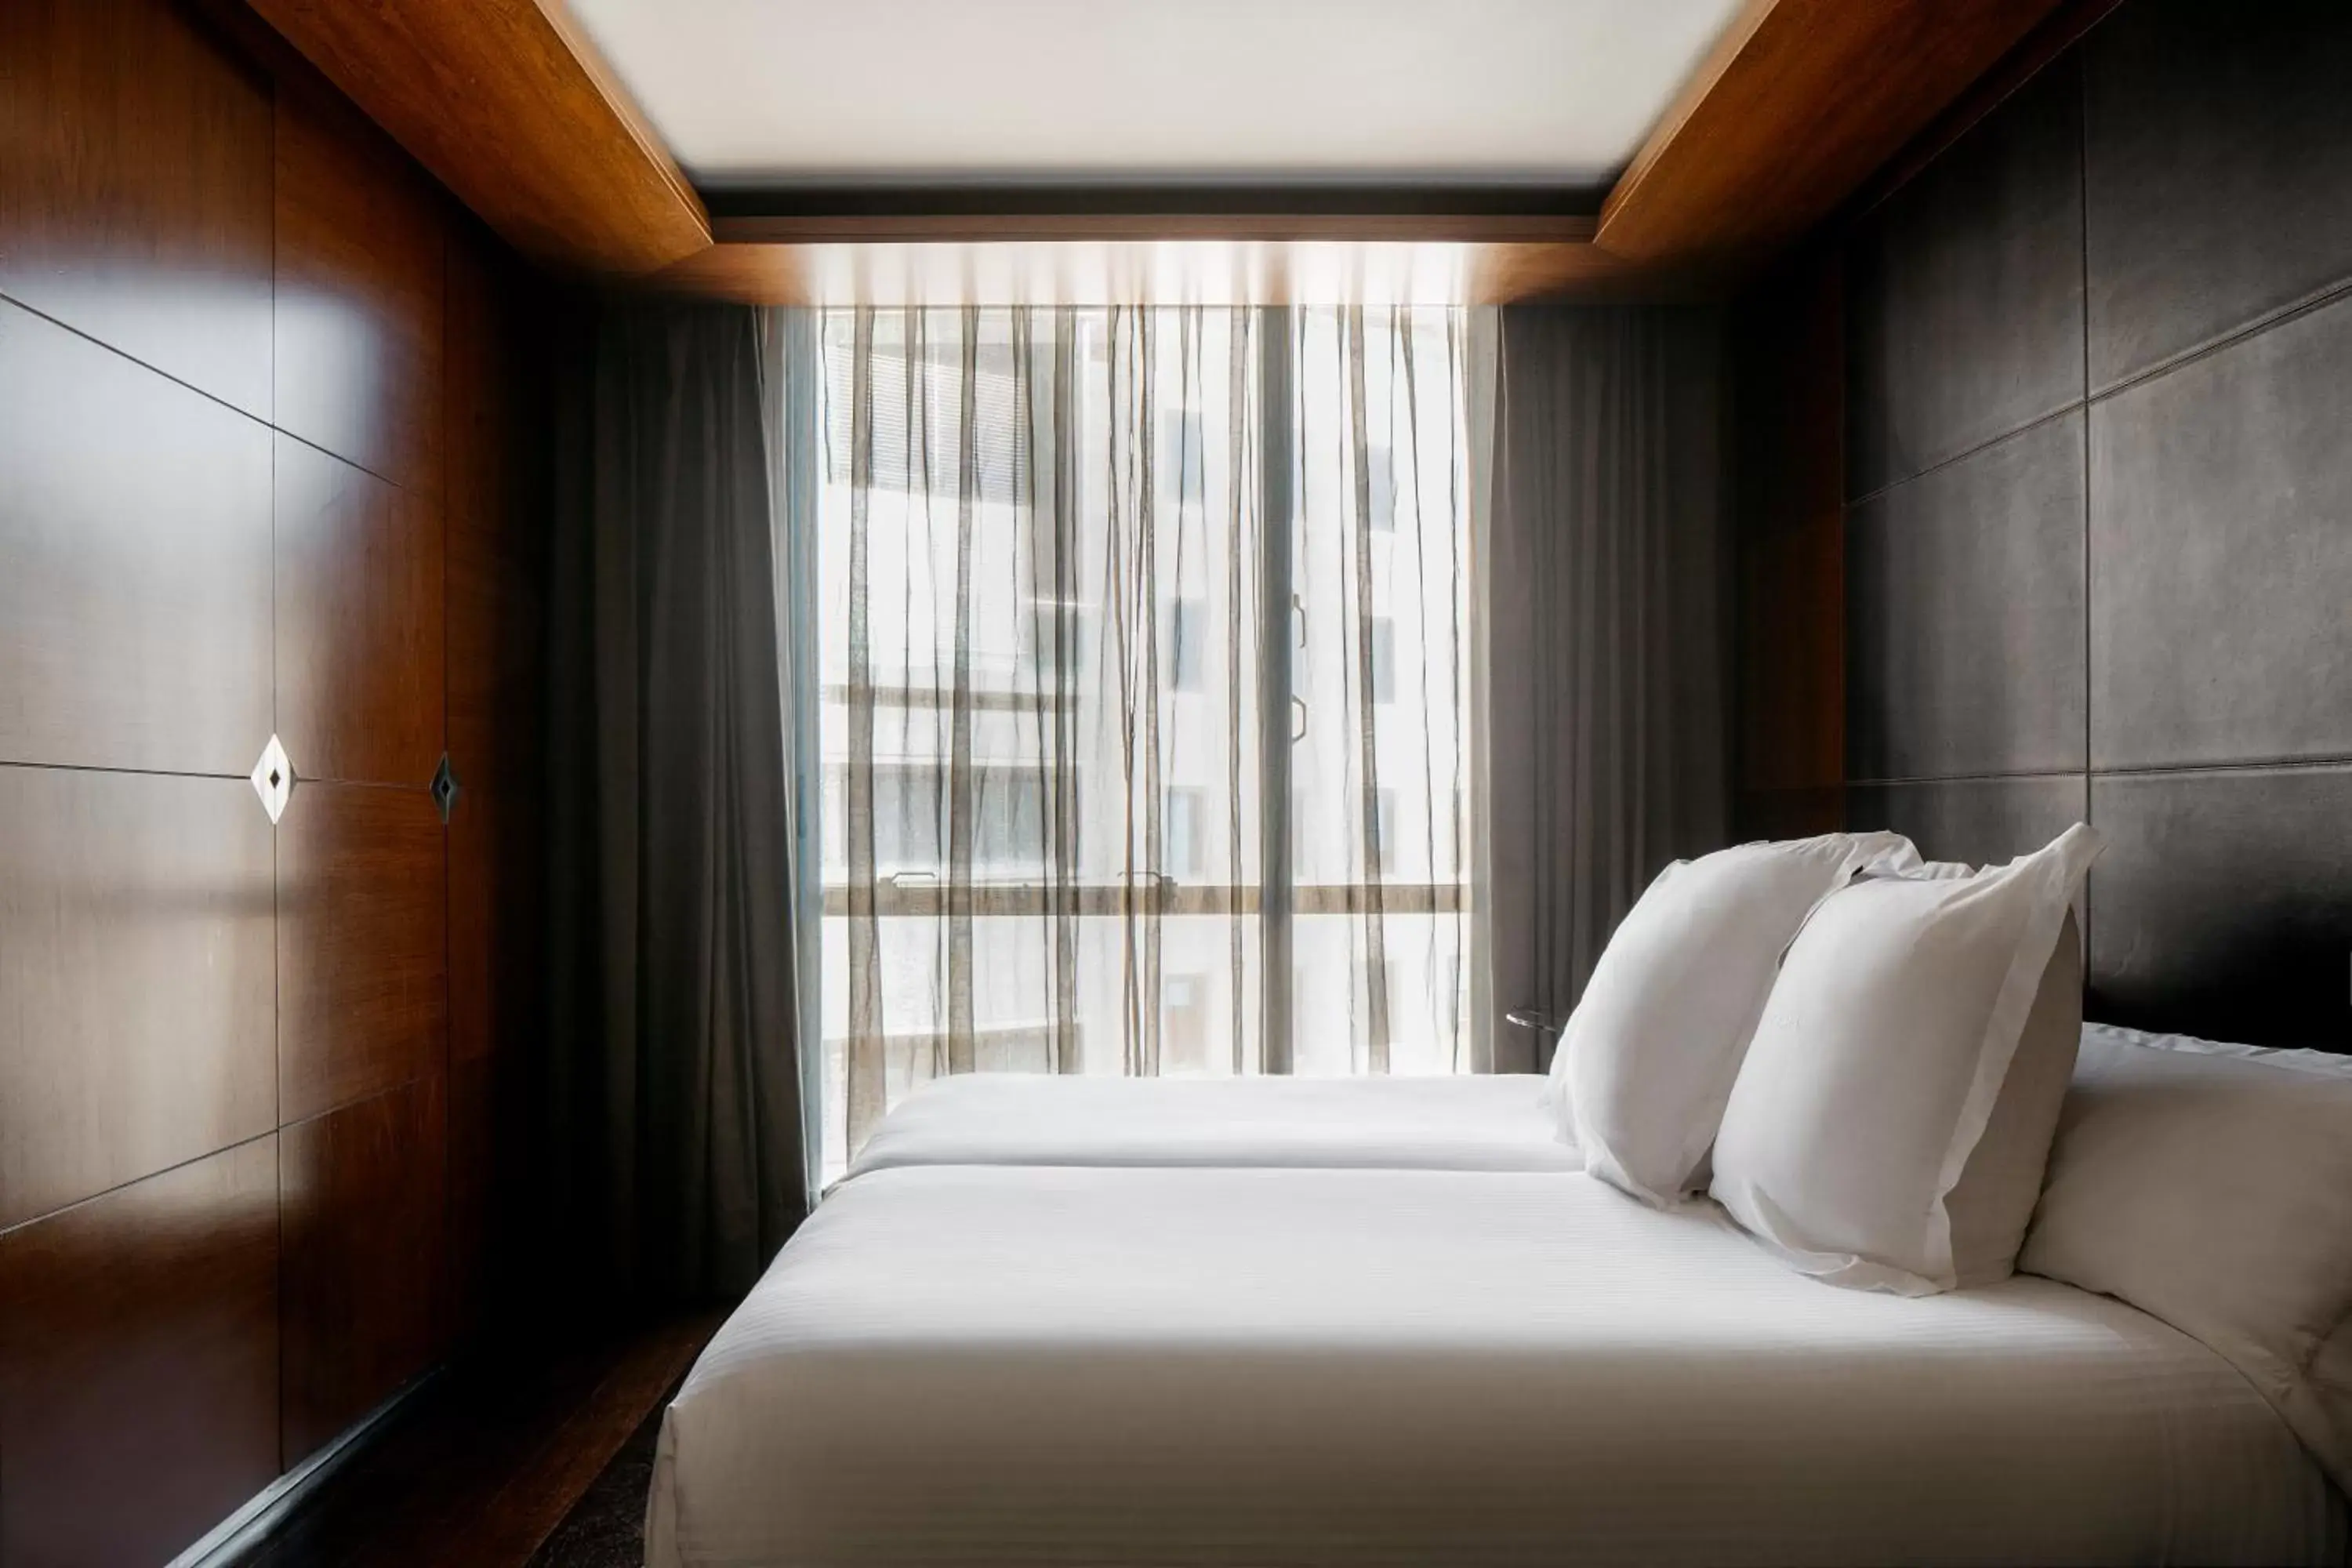 Superior Double or Twin Room (1-2 Adults) in Hotel Urban,a Member of Design Hotels